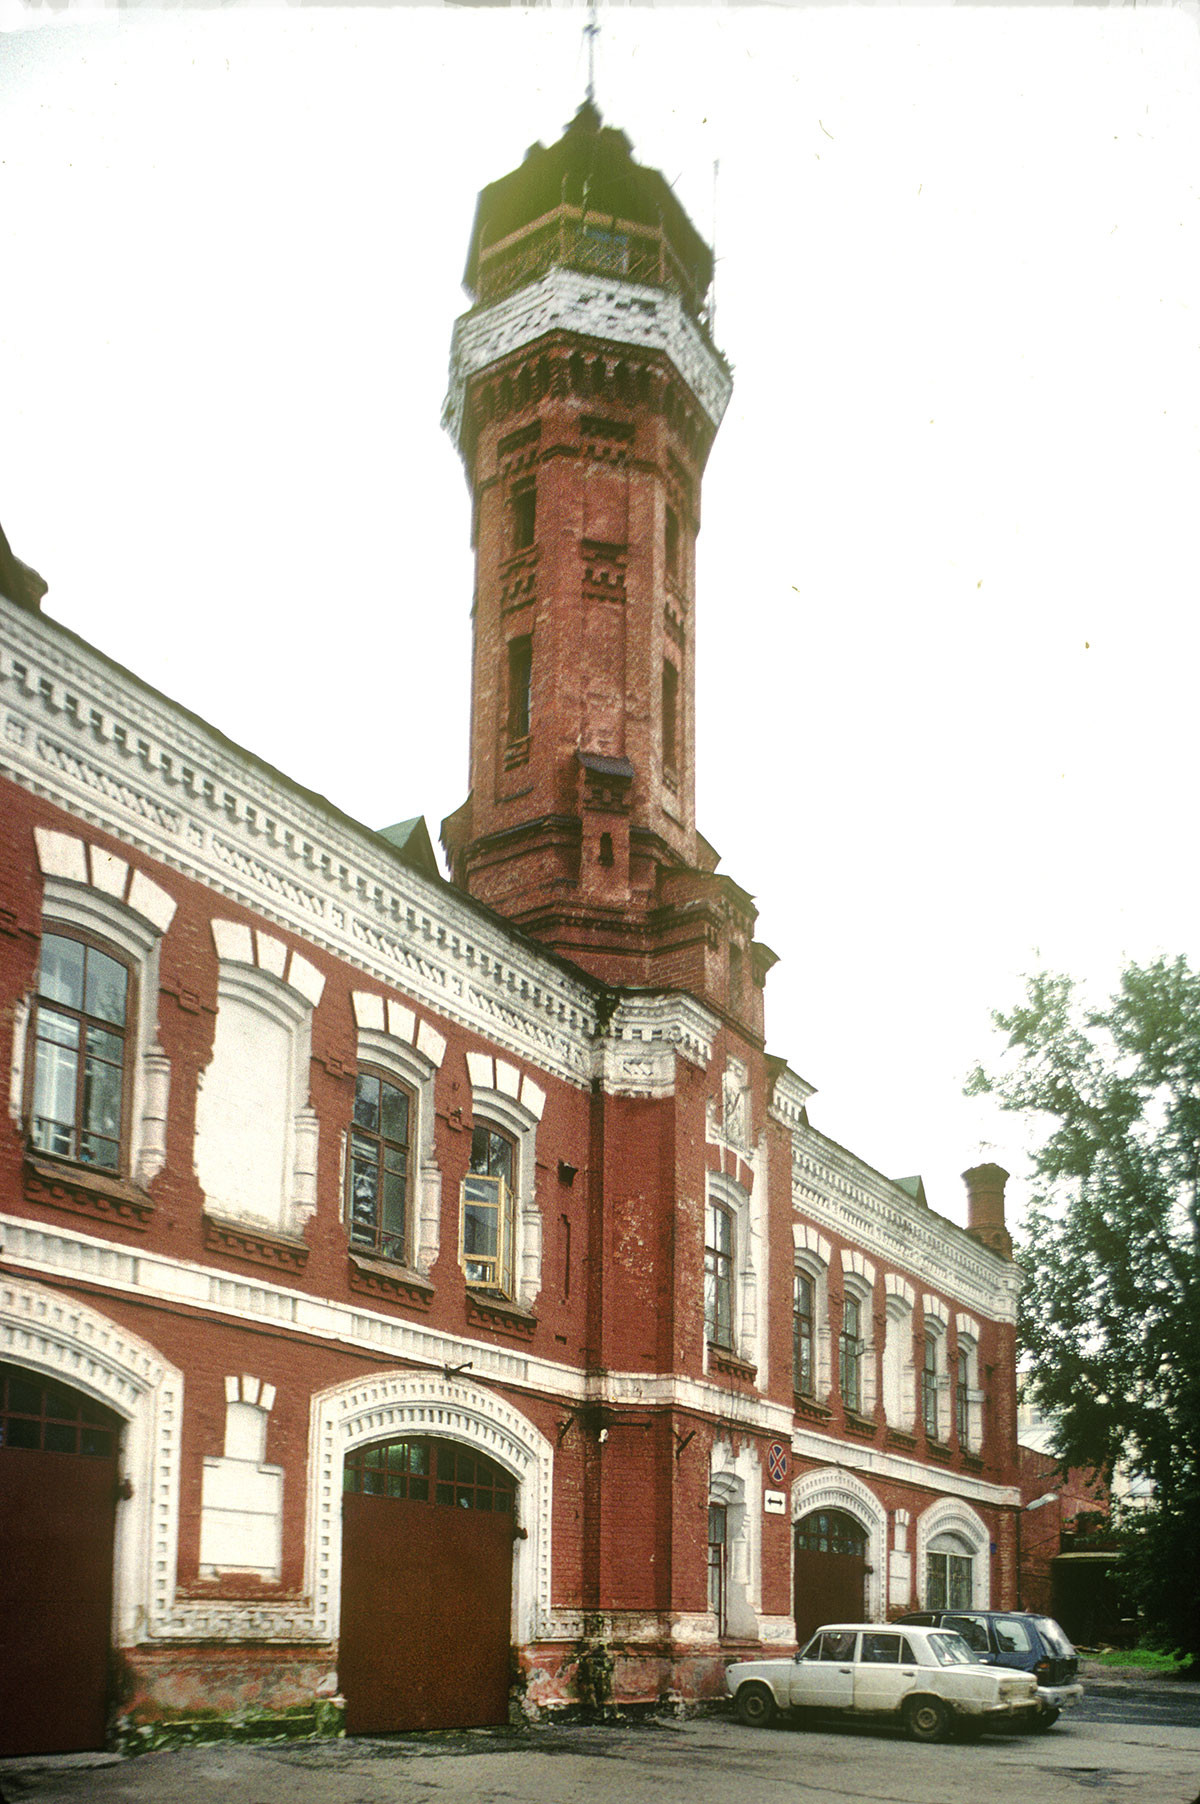 Central fire station & watchtower. August 1999